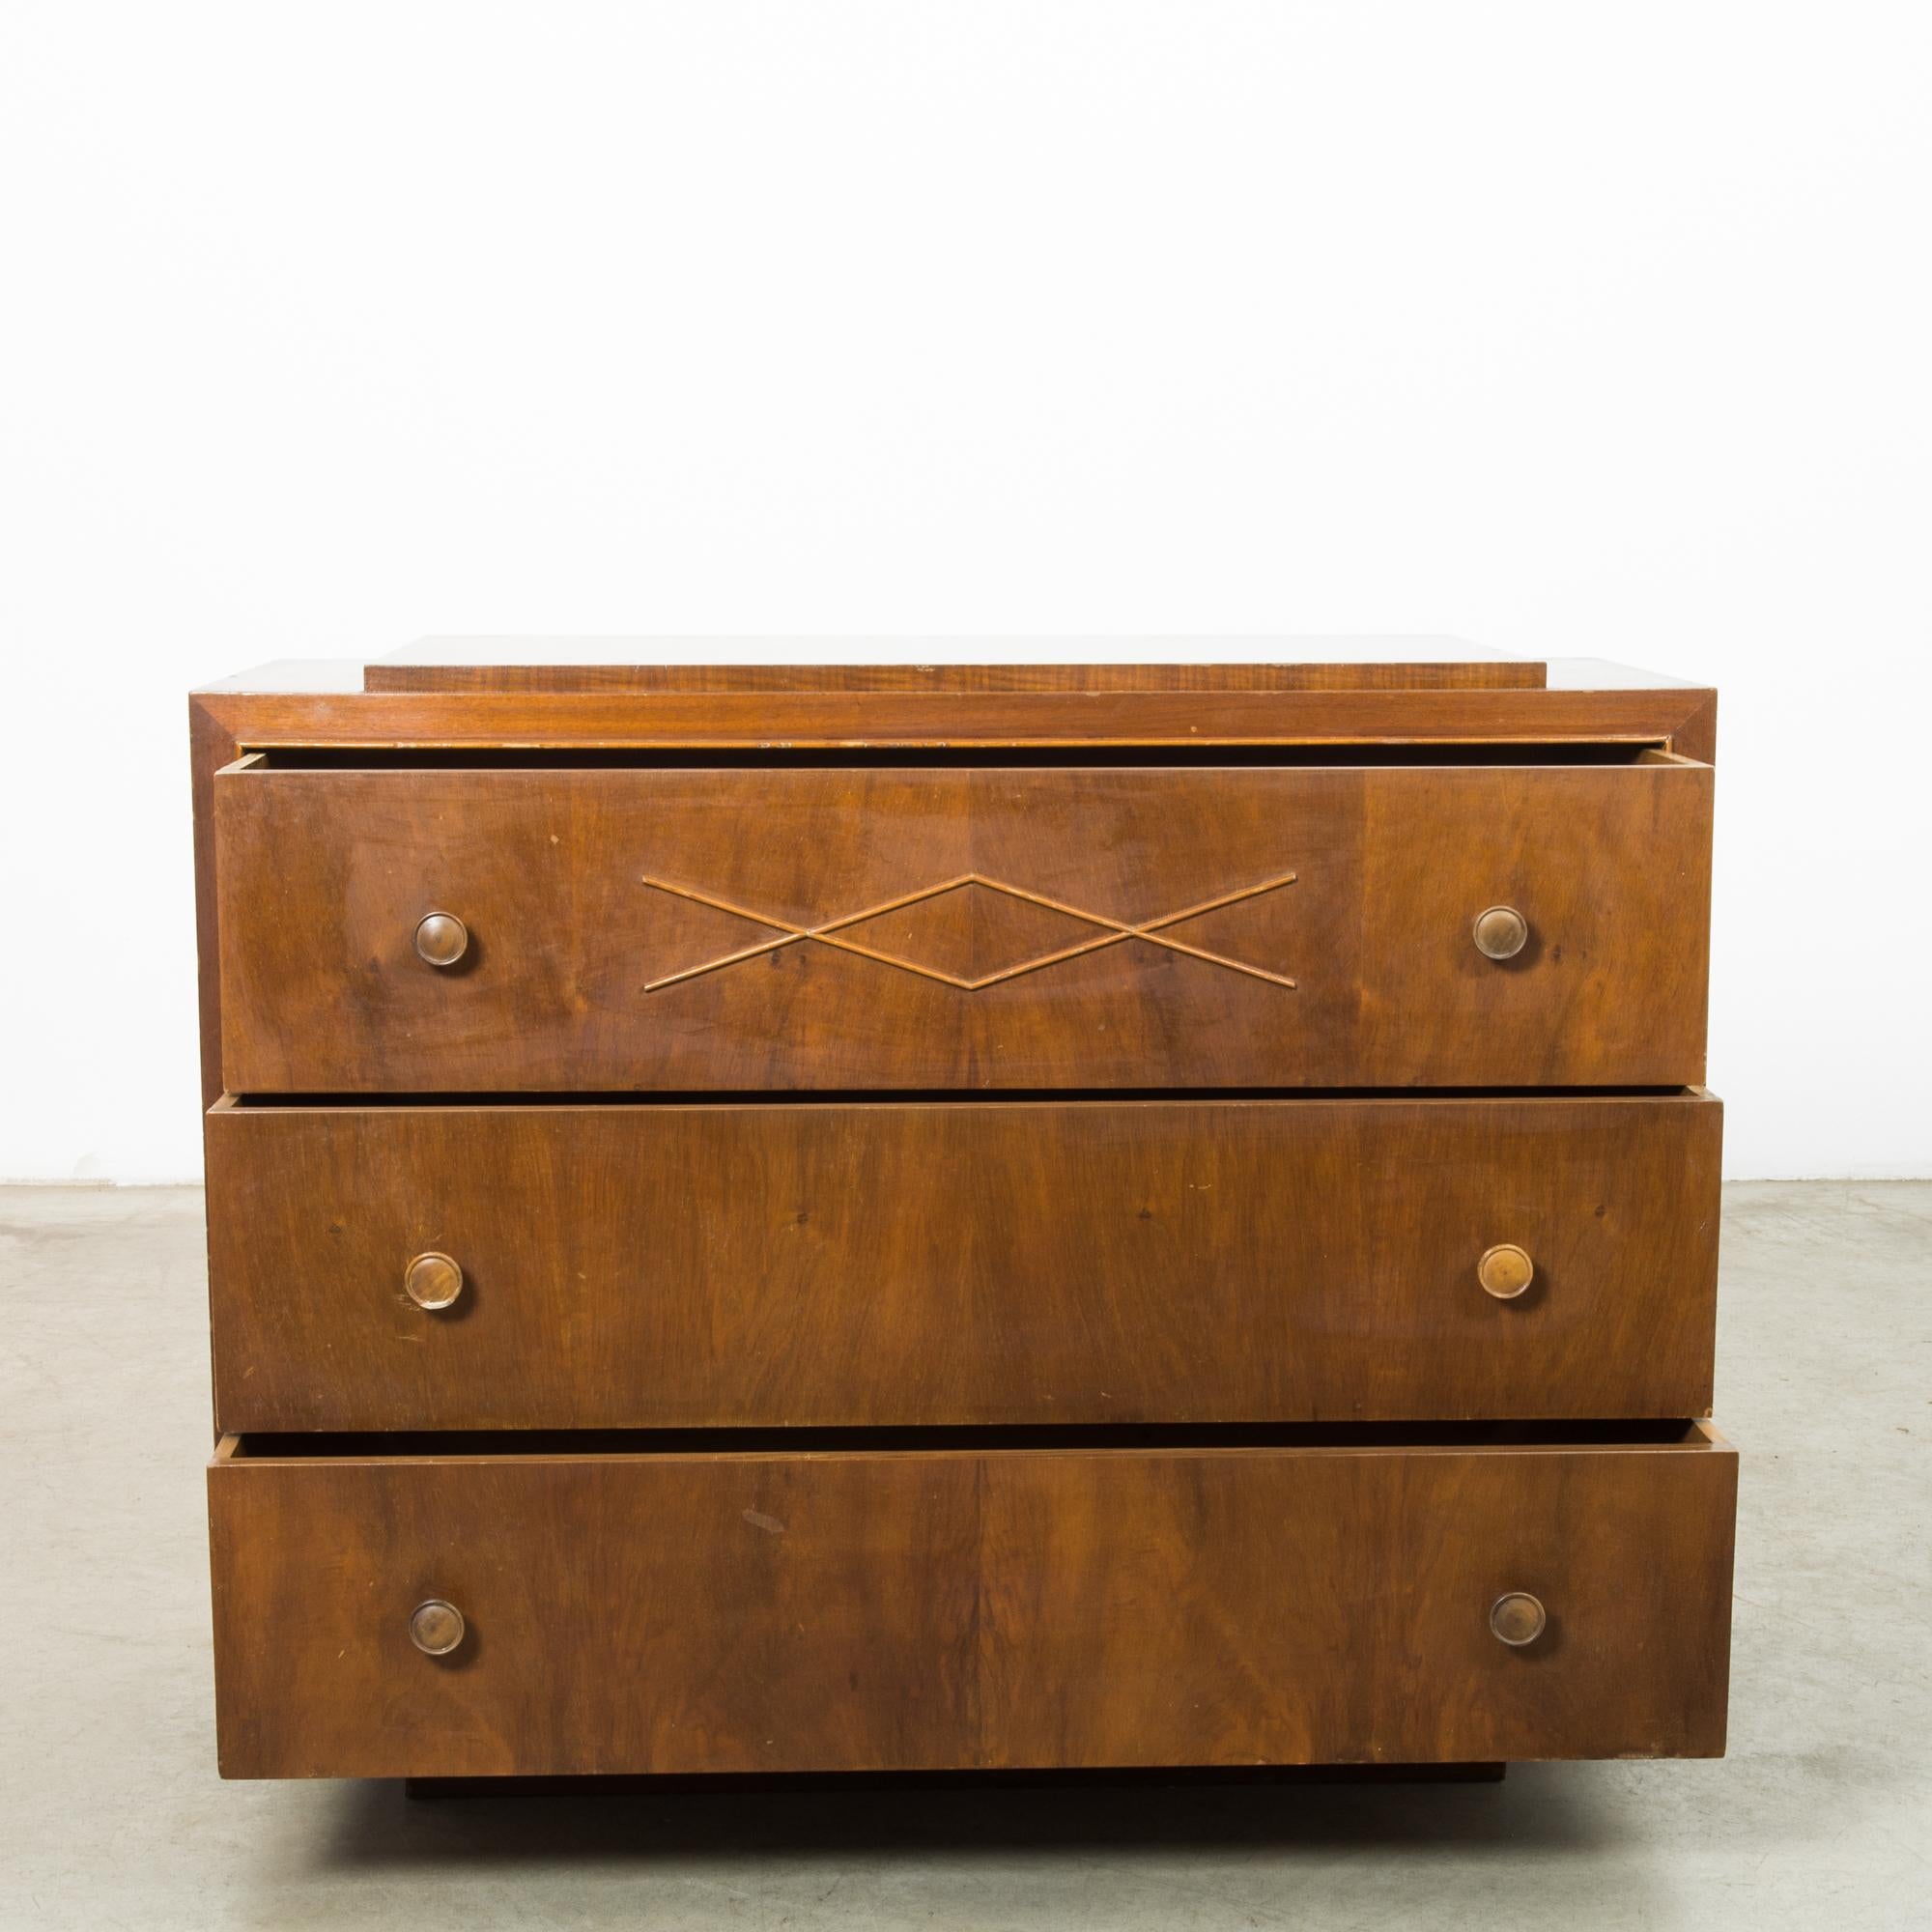 Step back into the grace of 1950s French design with this exquisite wooden chest of drawers. This piece brings the charm of a Parisian antique shop right into your bedroom or living space. The warm, honey-toned wood is rich with character,